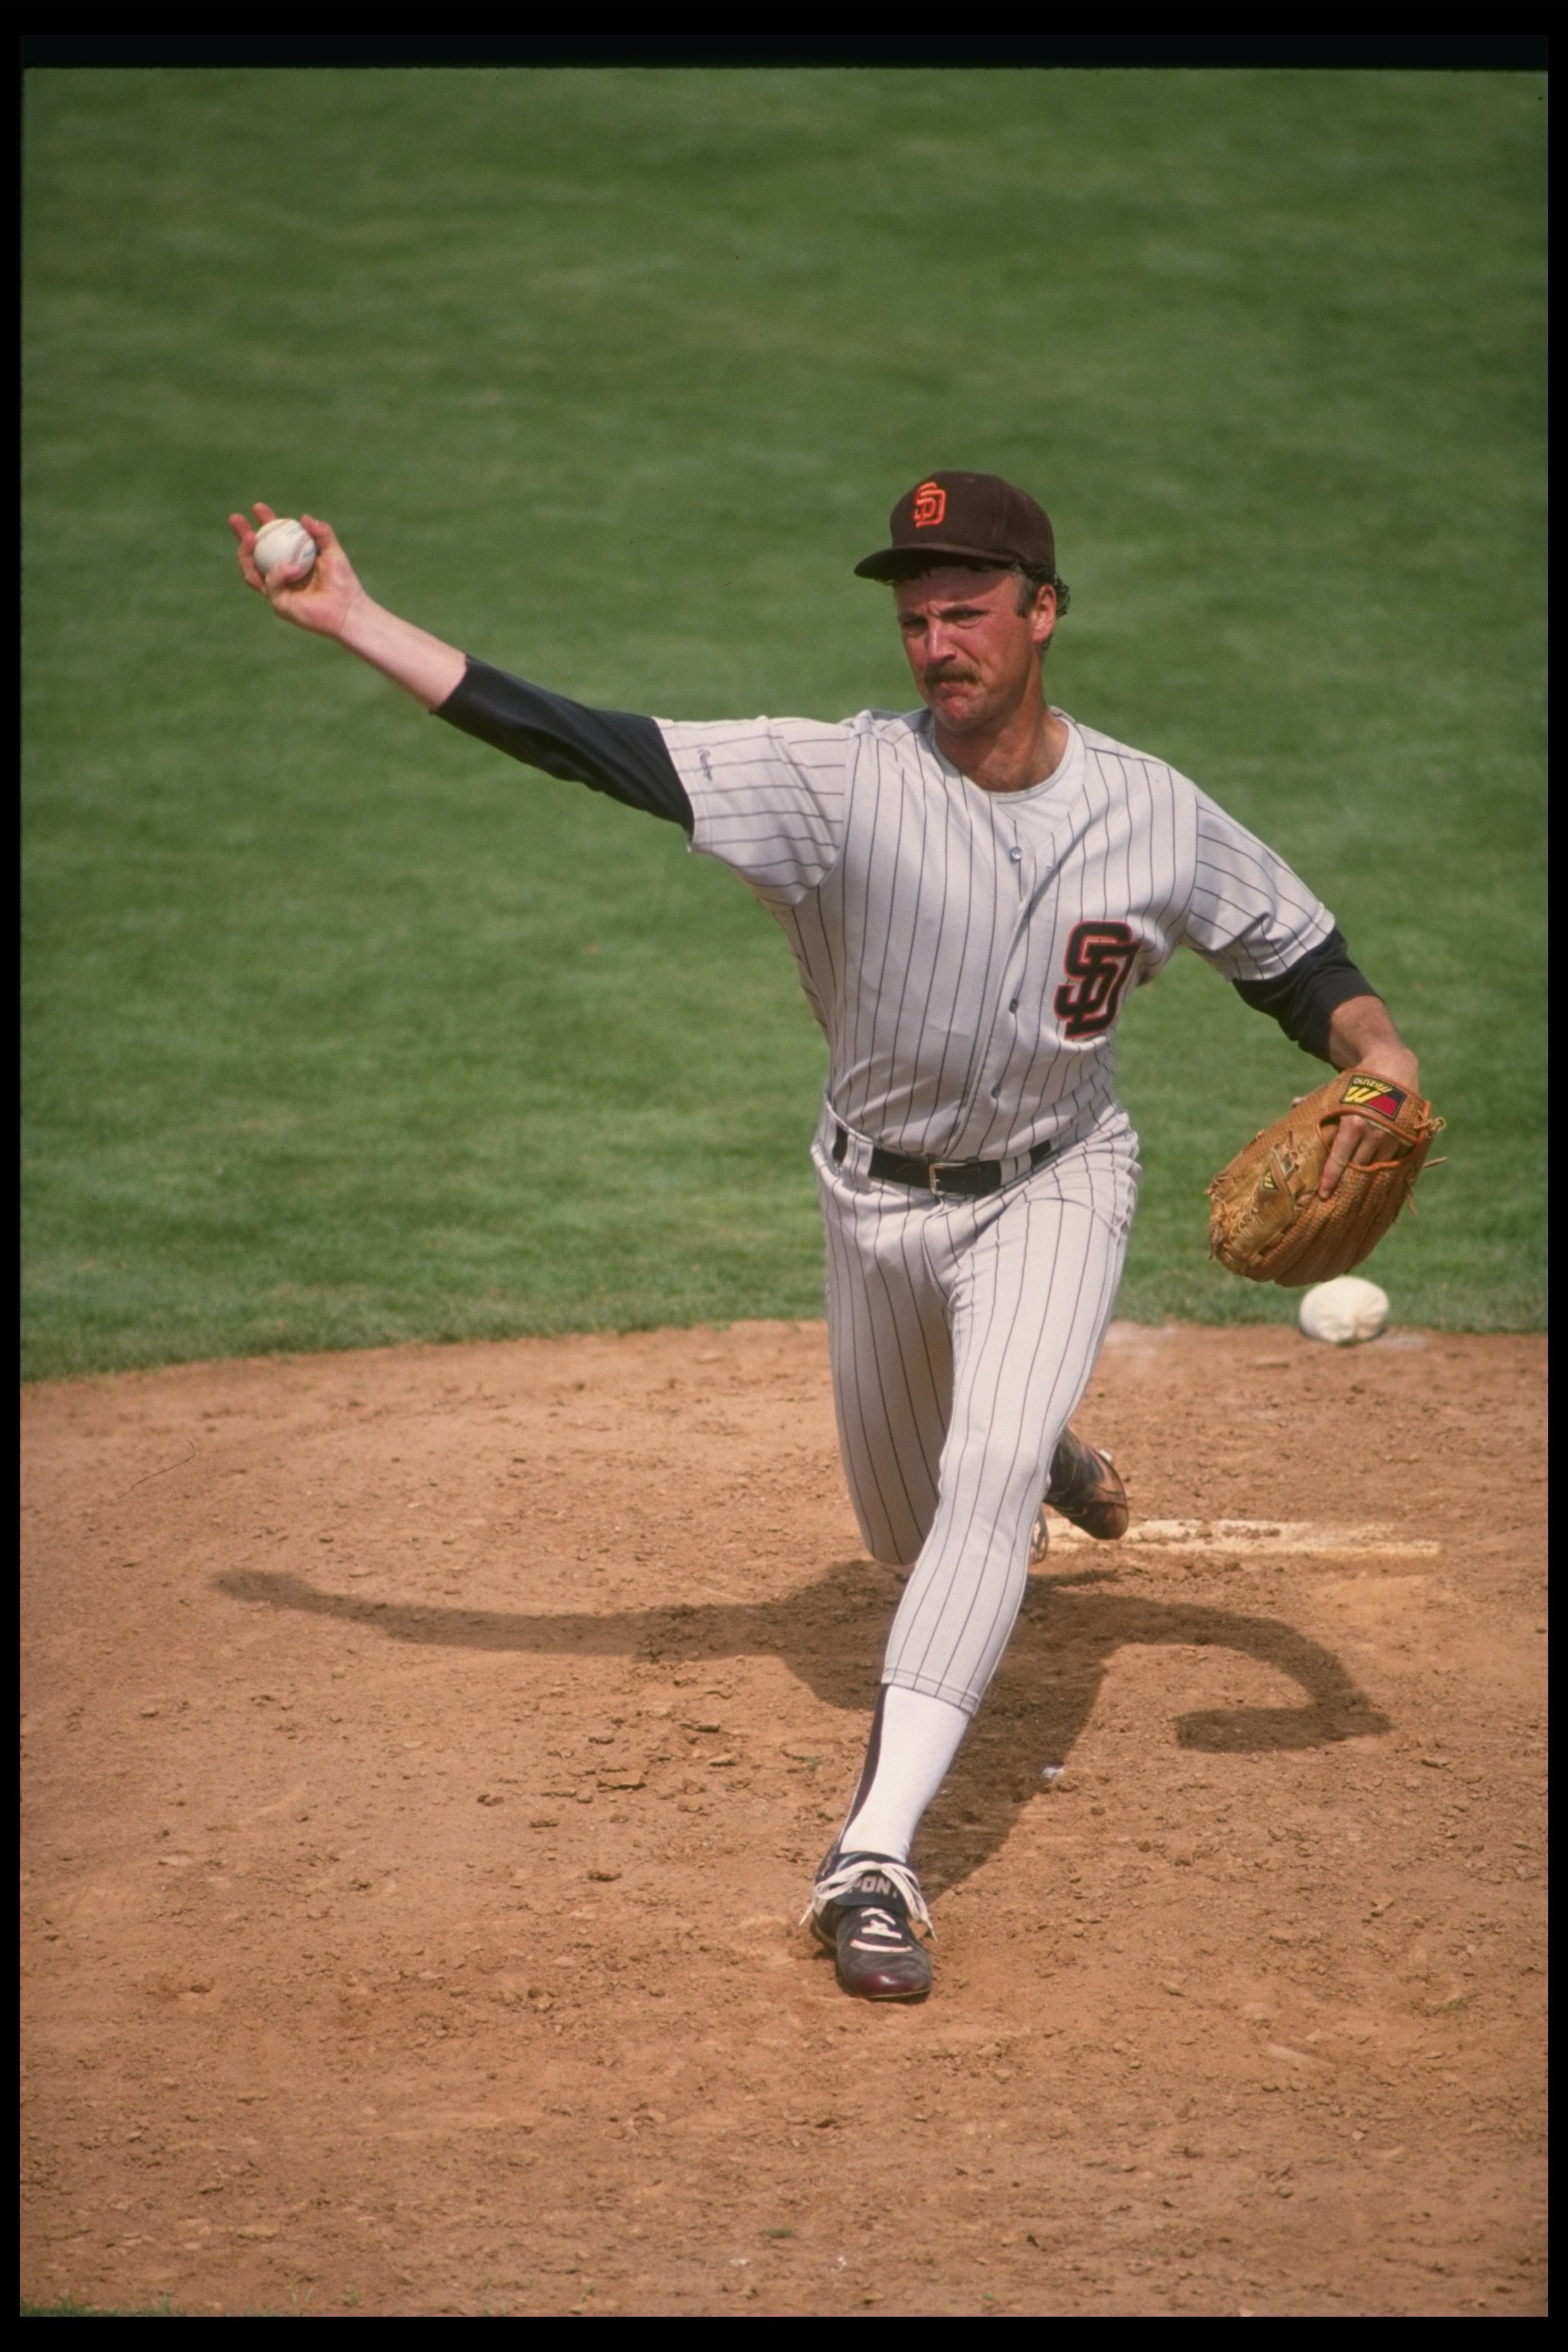 1990:  Pitcher Ed Whitson of the San Diego Padres throws a pitch during a game at Jack Murphy Stadium in San Diego, California. Mandatory Credit: Ken Levine  /Allsport